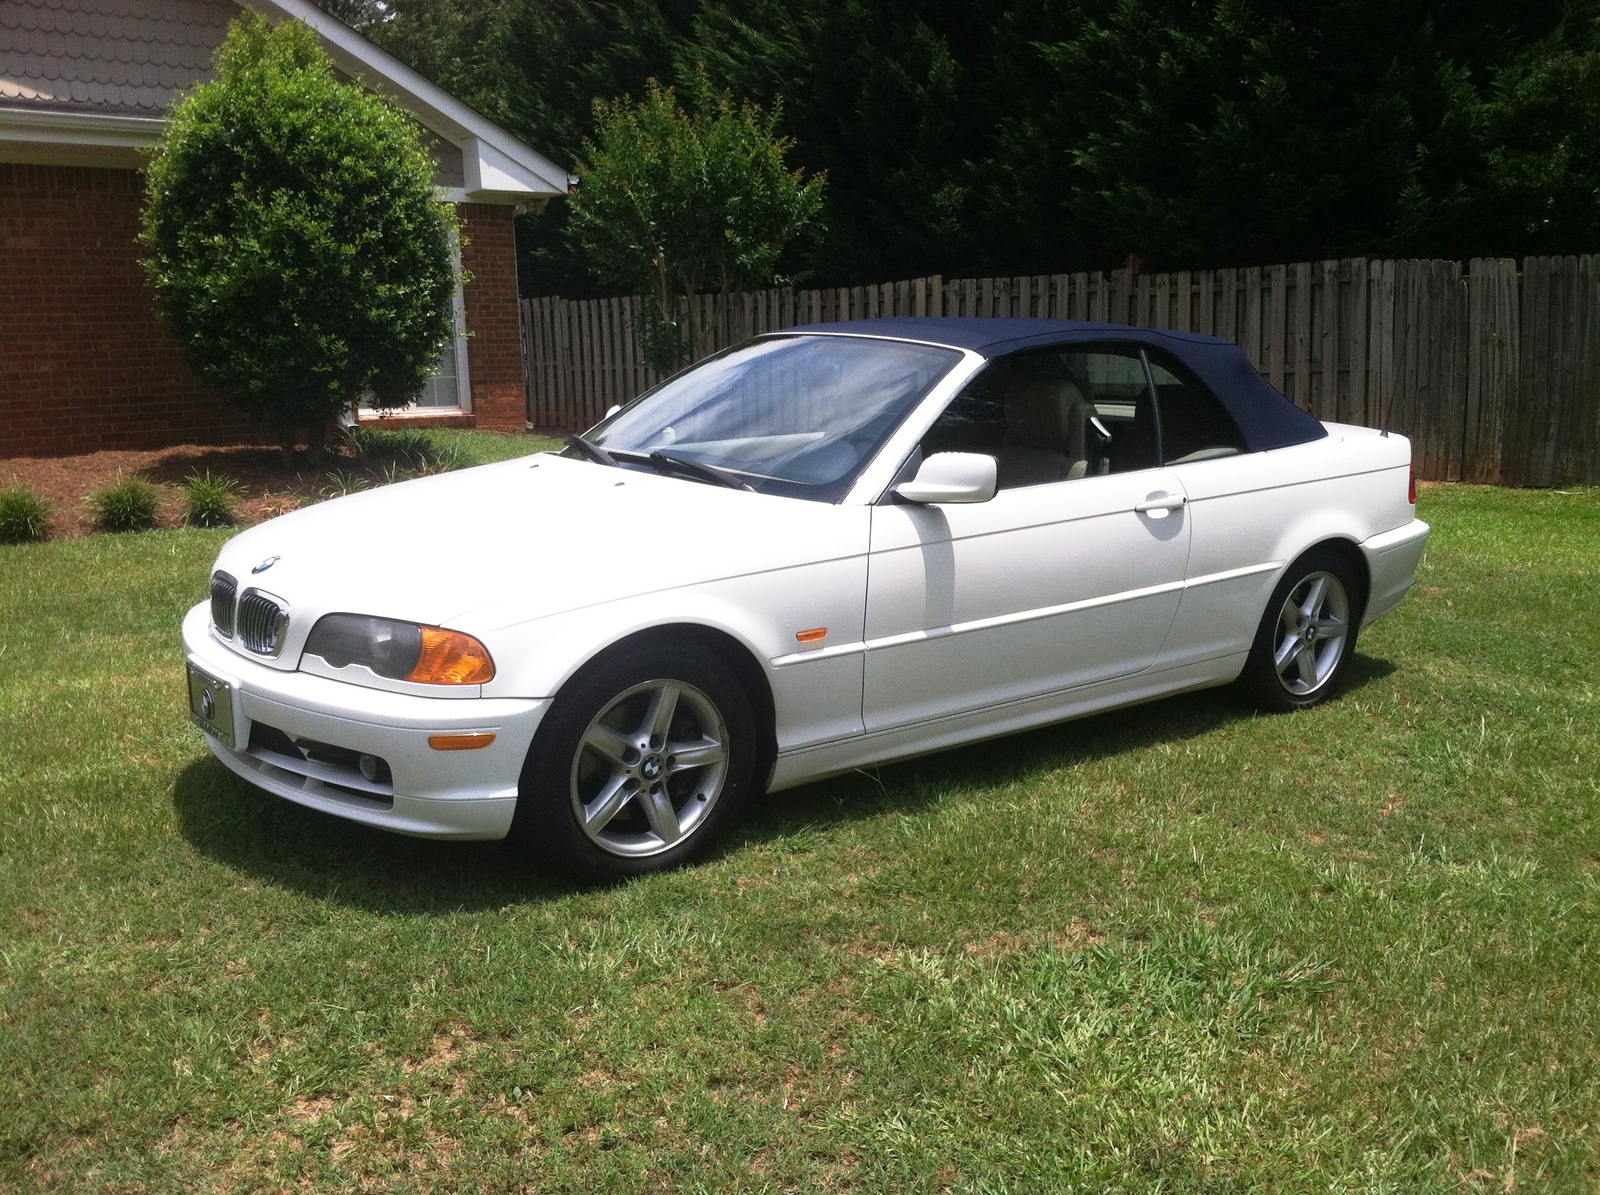 2002 Bmw 325i convertible review